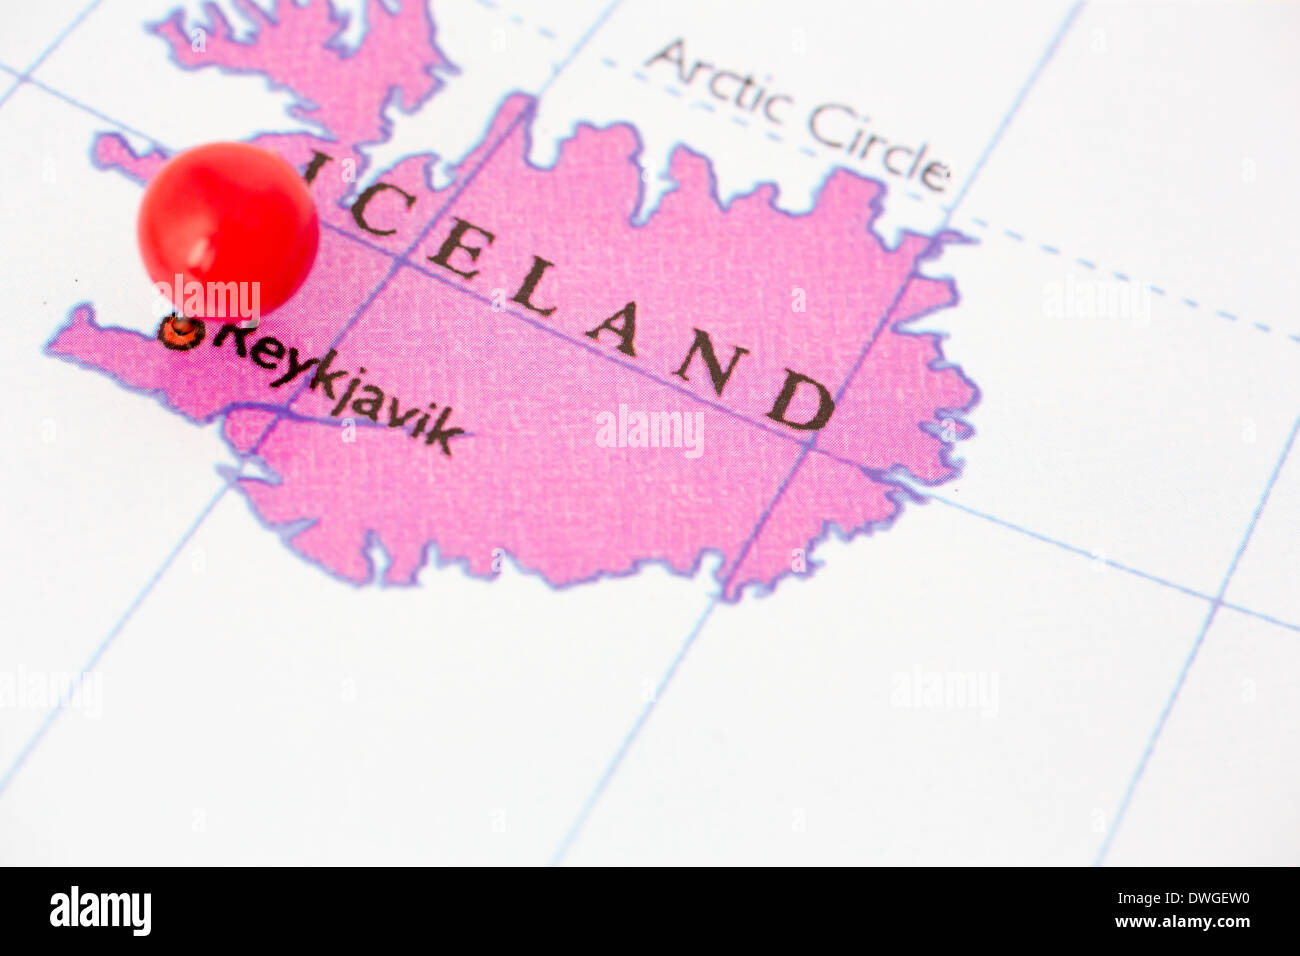 Round red thumb tack pinched through city of Reykjavik on Iceland map. Part of collection covering all major capitals of Europe. Stock Photo